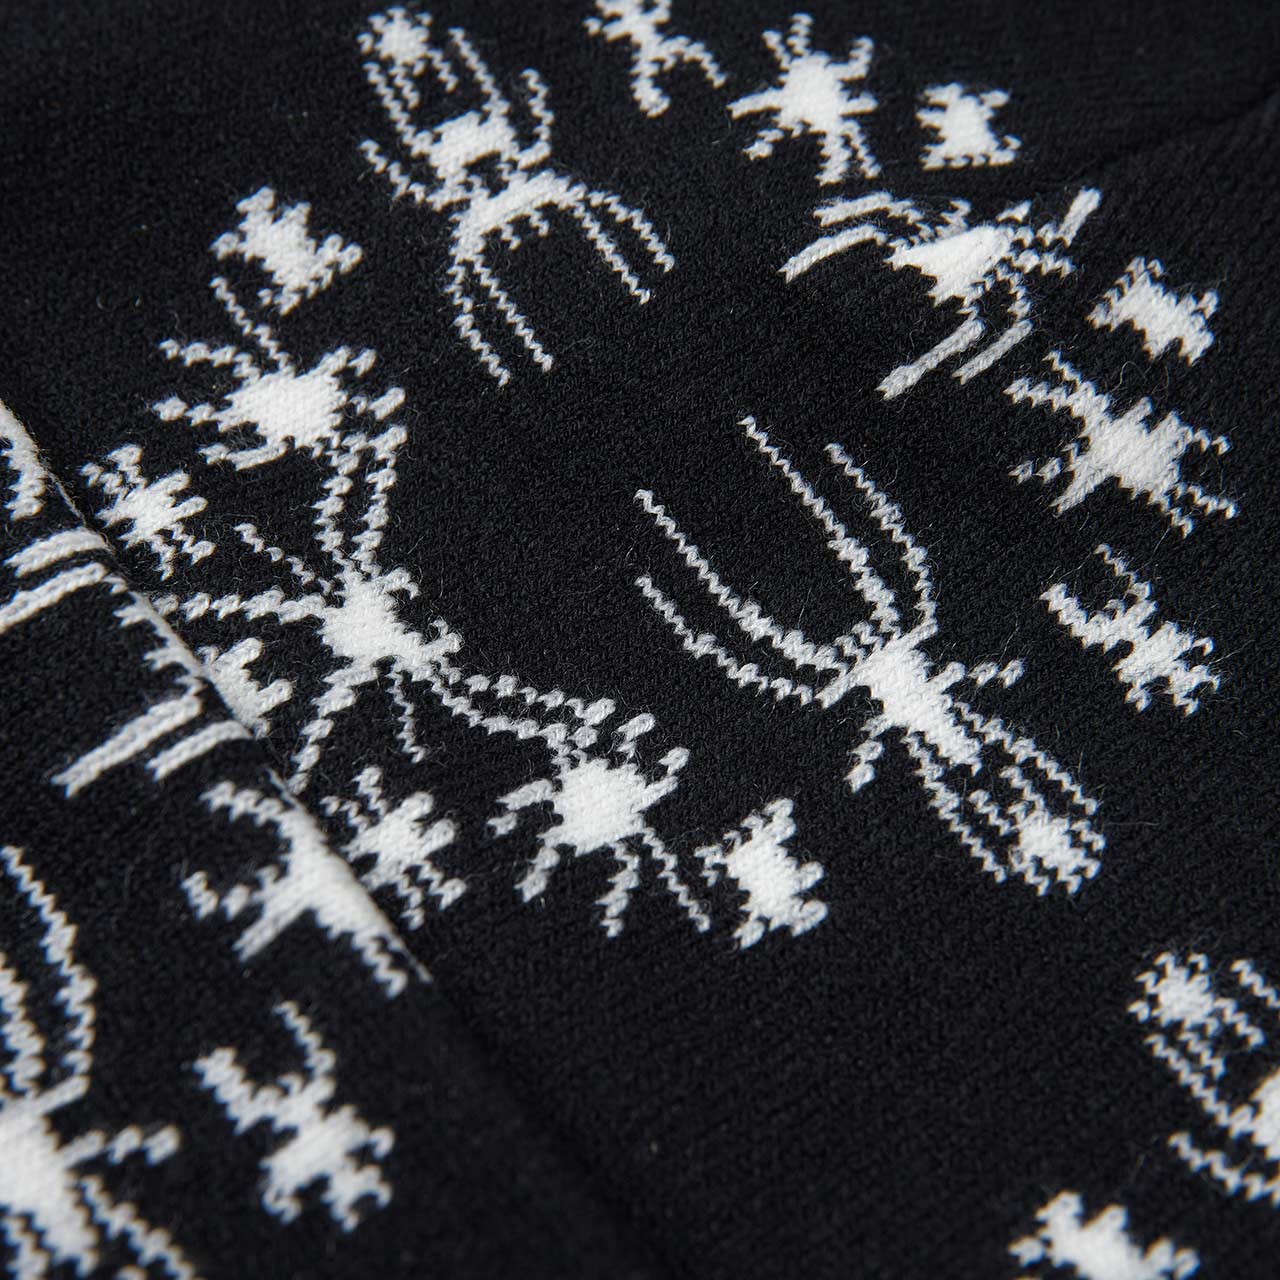 fucking awesome fucking awesome spider stamp cuff beanie (black) p708495-001SPONESIZE